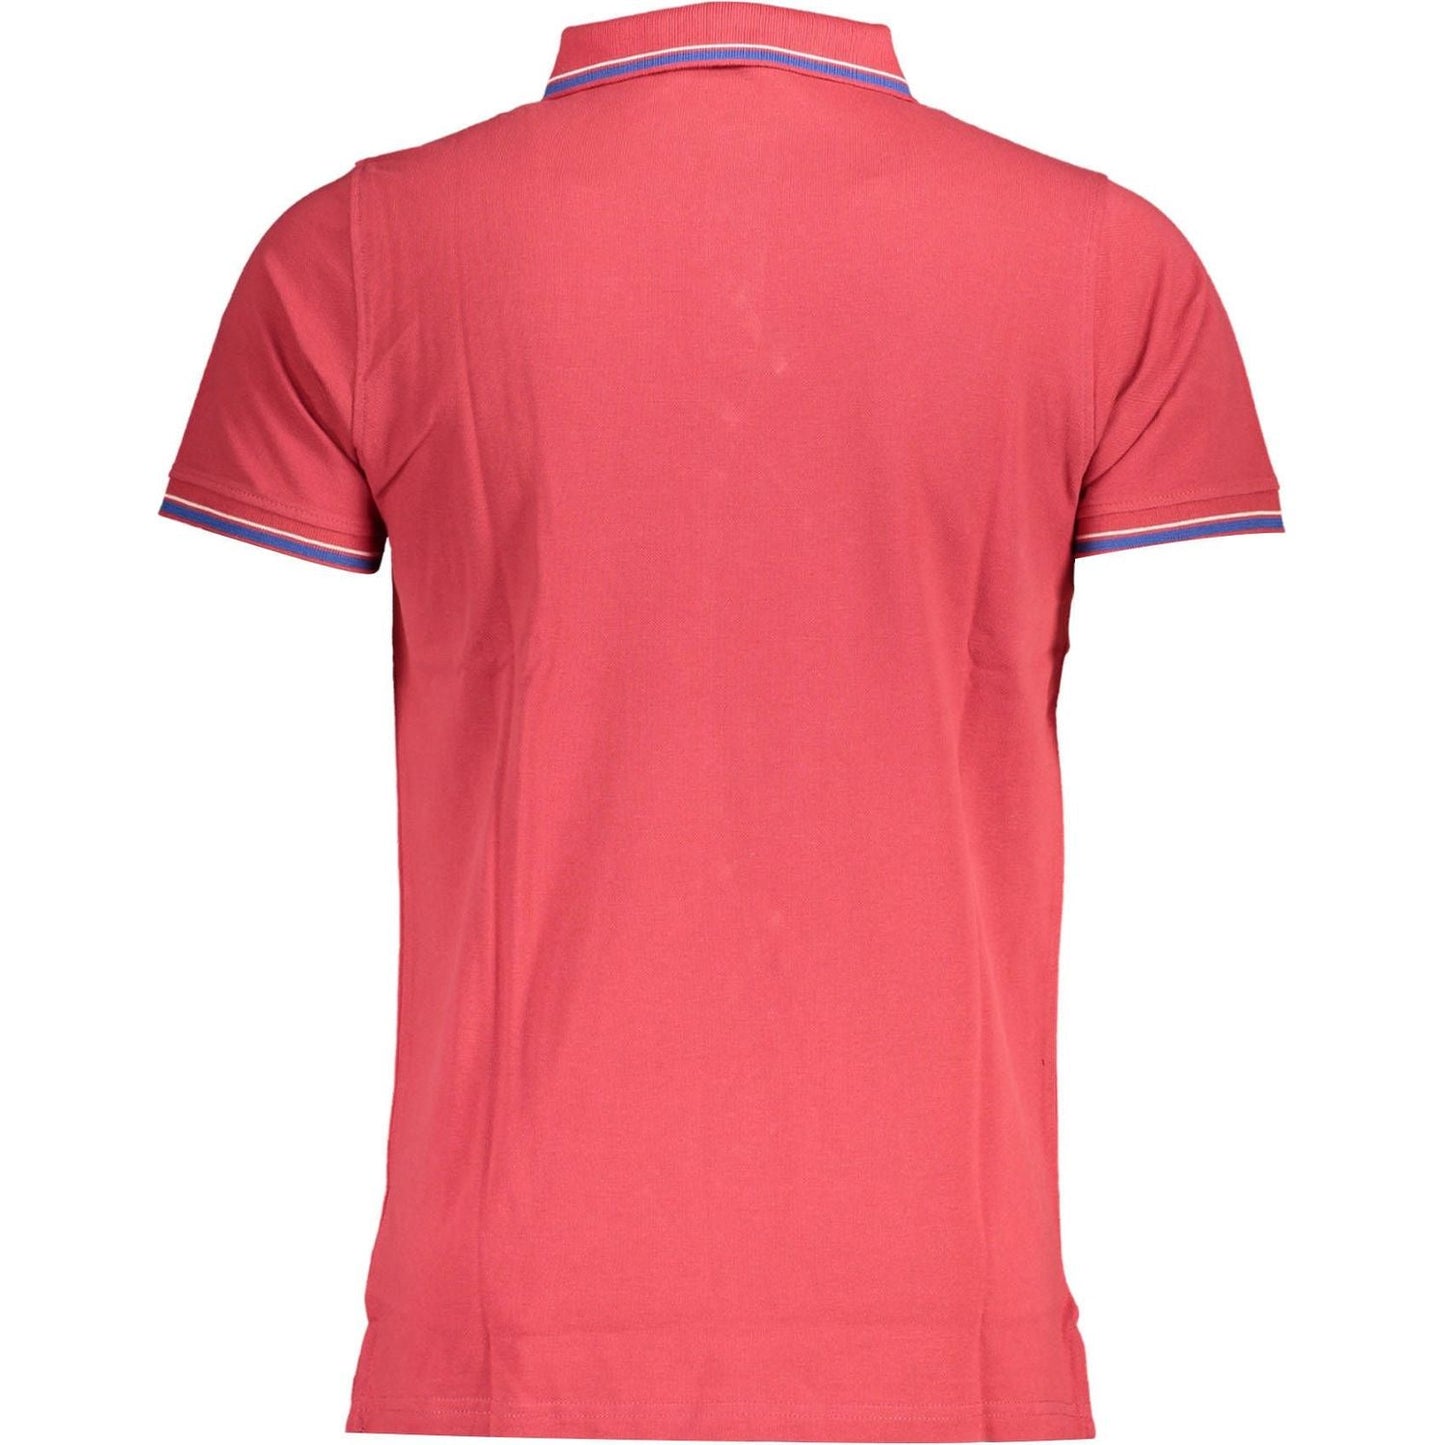 Norway 1963 Chic Contrast Detail Red Polo Shirt chic-contrast-detail-red-polo-shirt